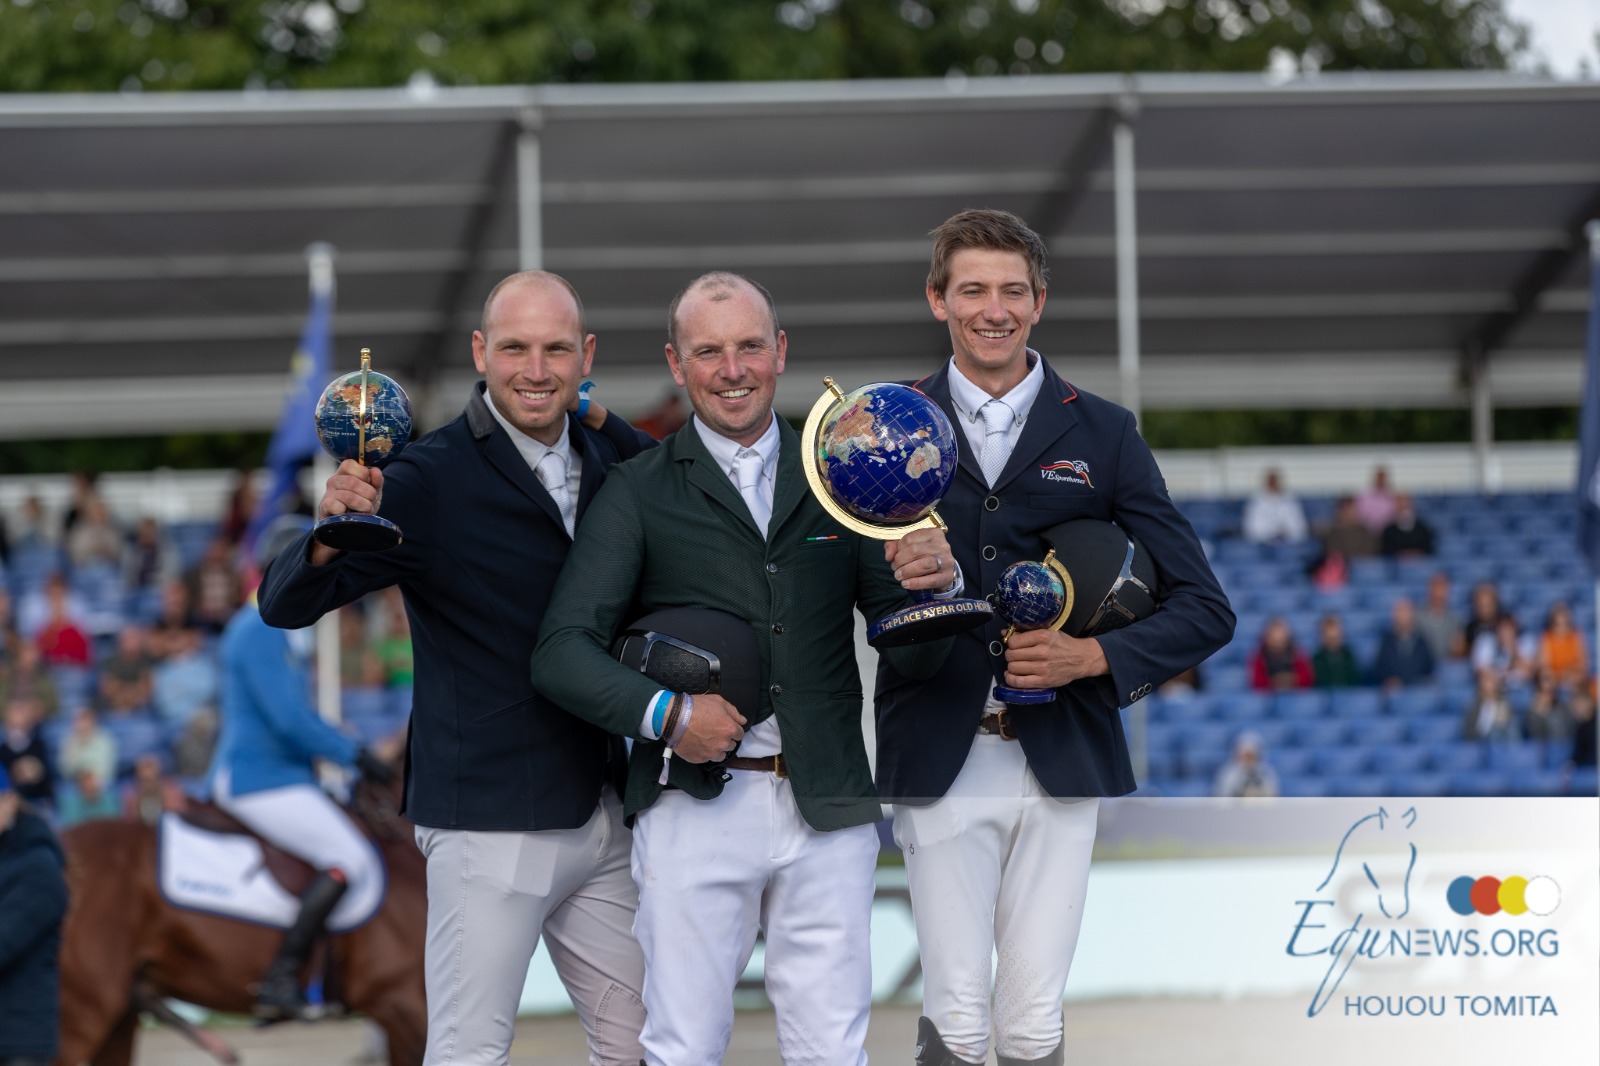 Gerard O'Neill and Bp Goodfellas are new World Champions of the five year olds